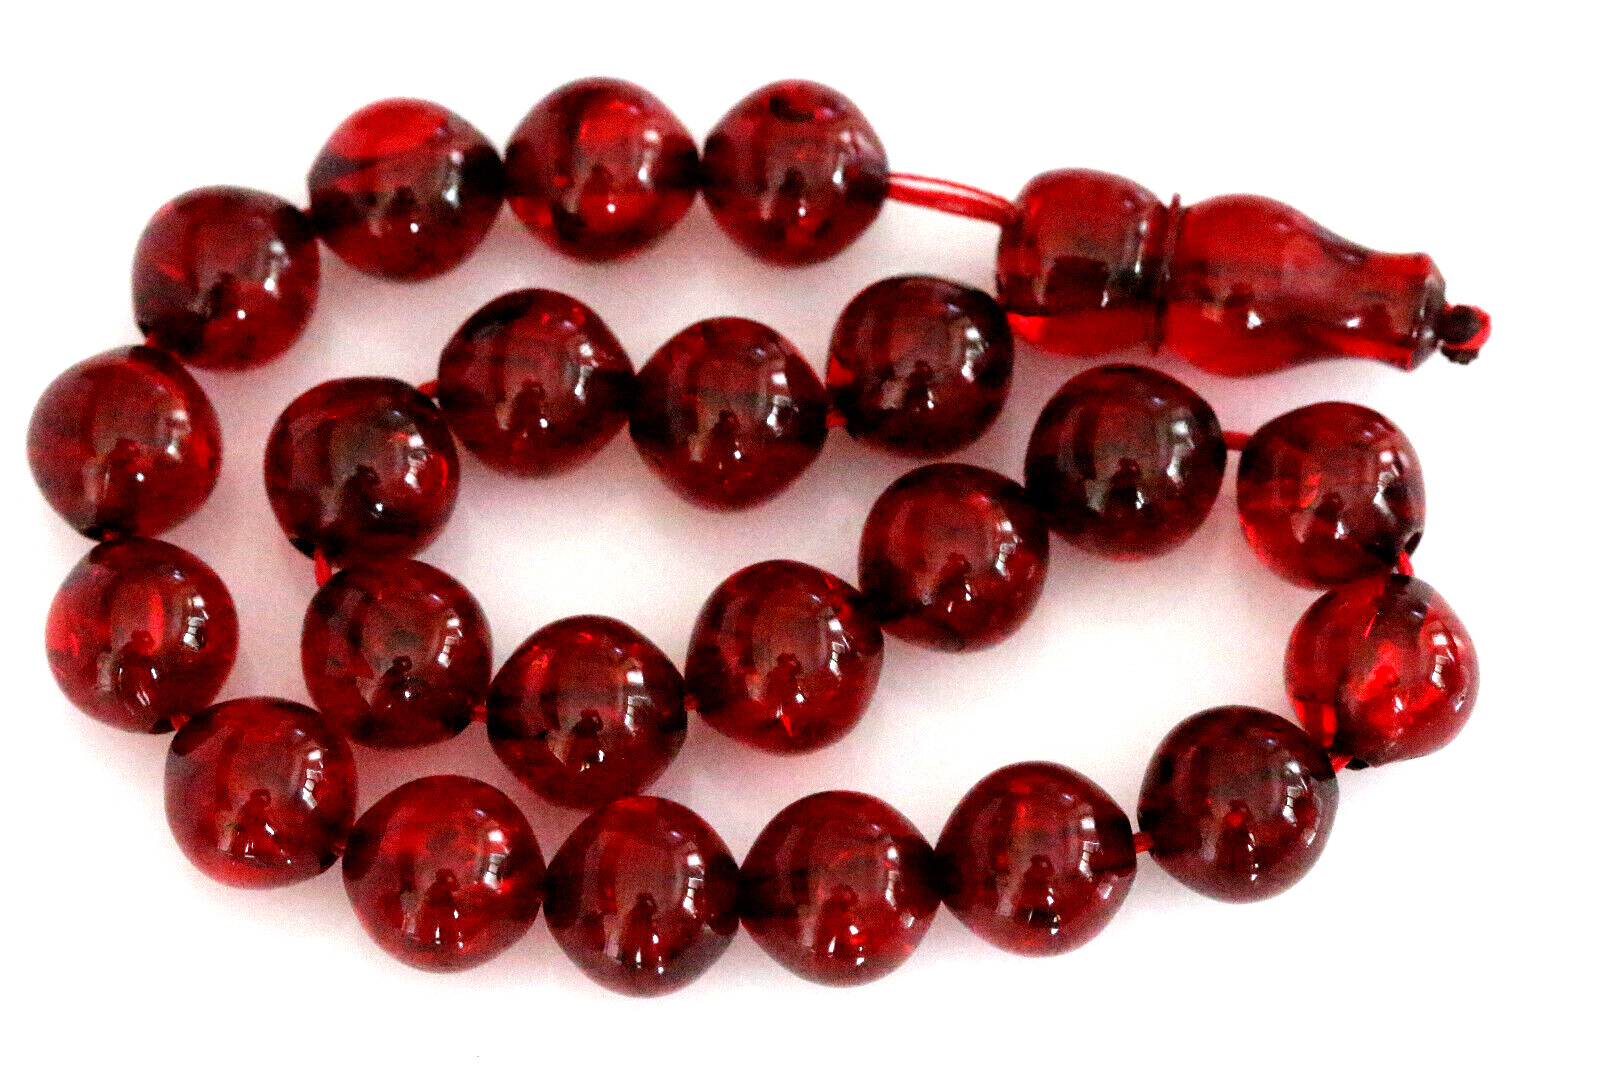 Closeout 42 Grams, Genuine Old Beauty Cherry Faturan 23 Rosary Beads of 16 mm